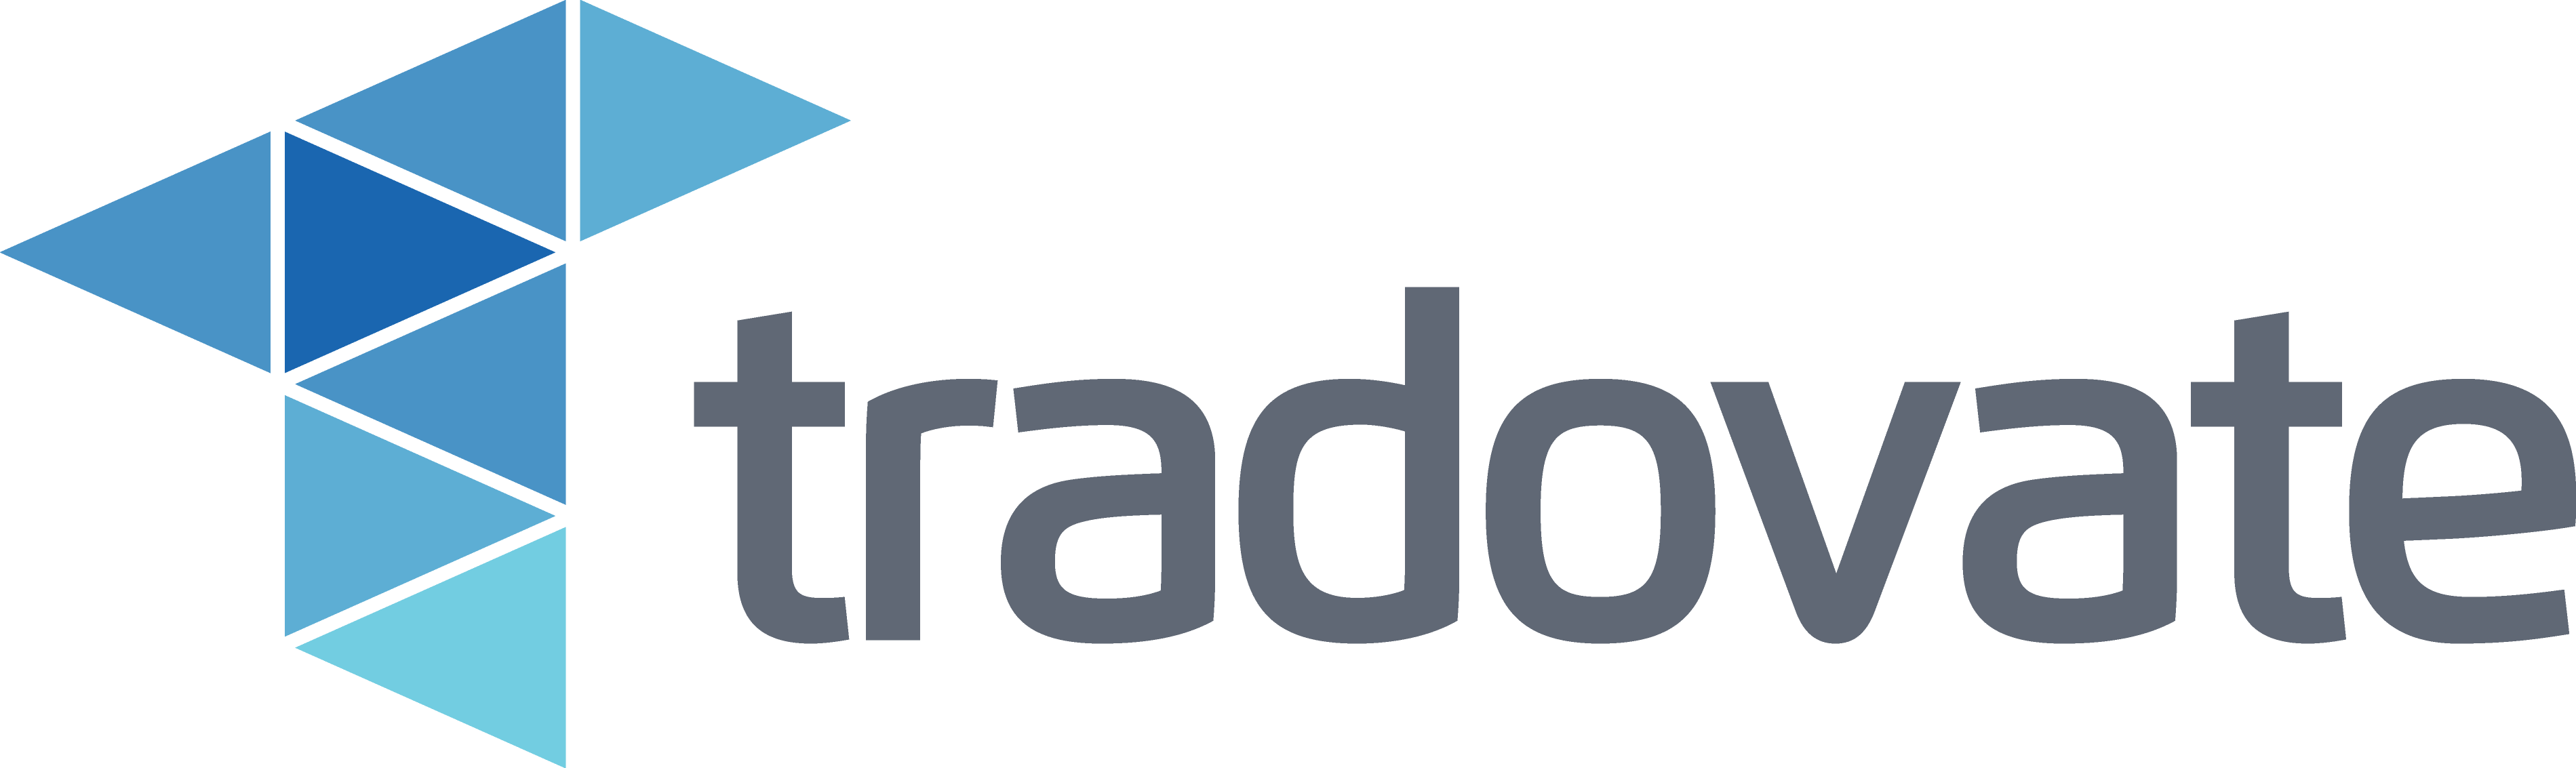 New Online Brokerage 'Tradovate' Goes Live